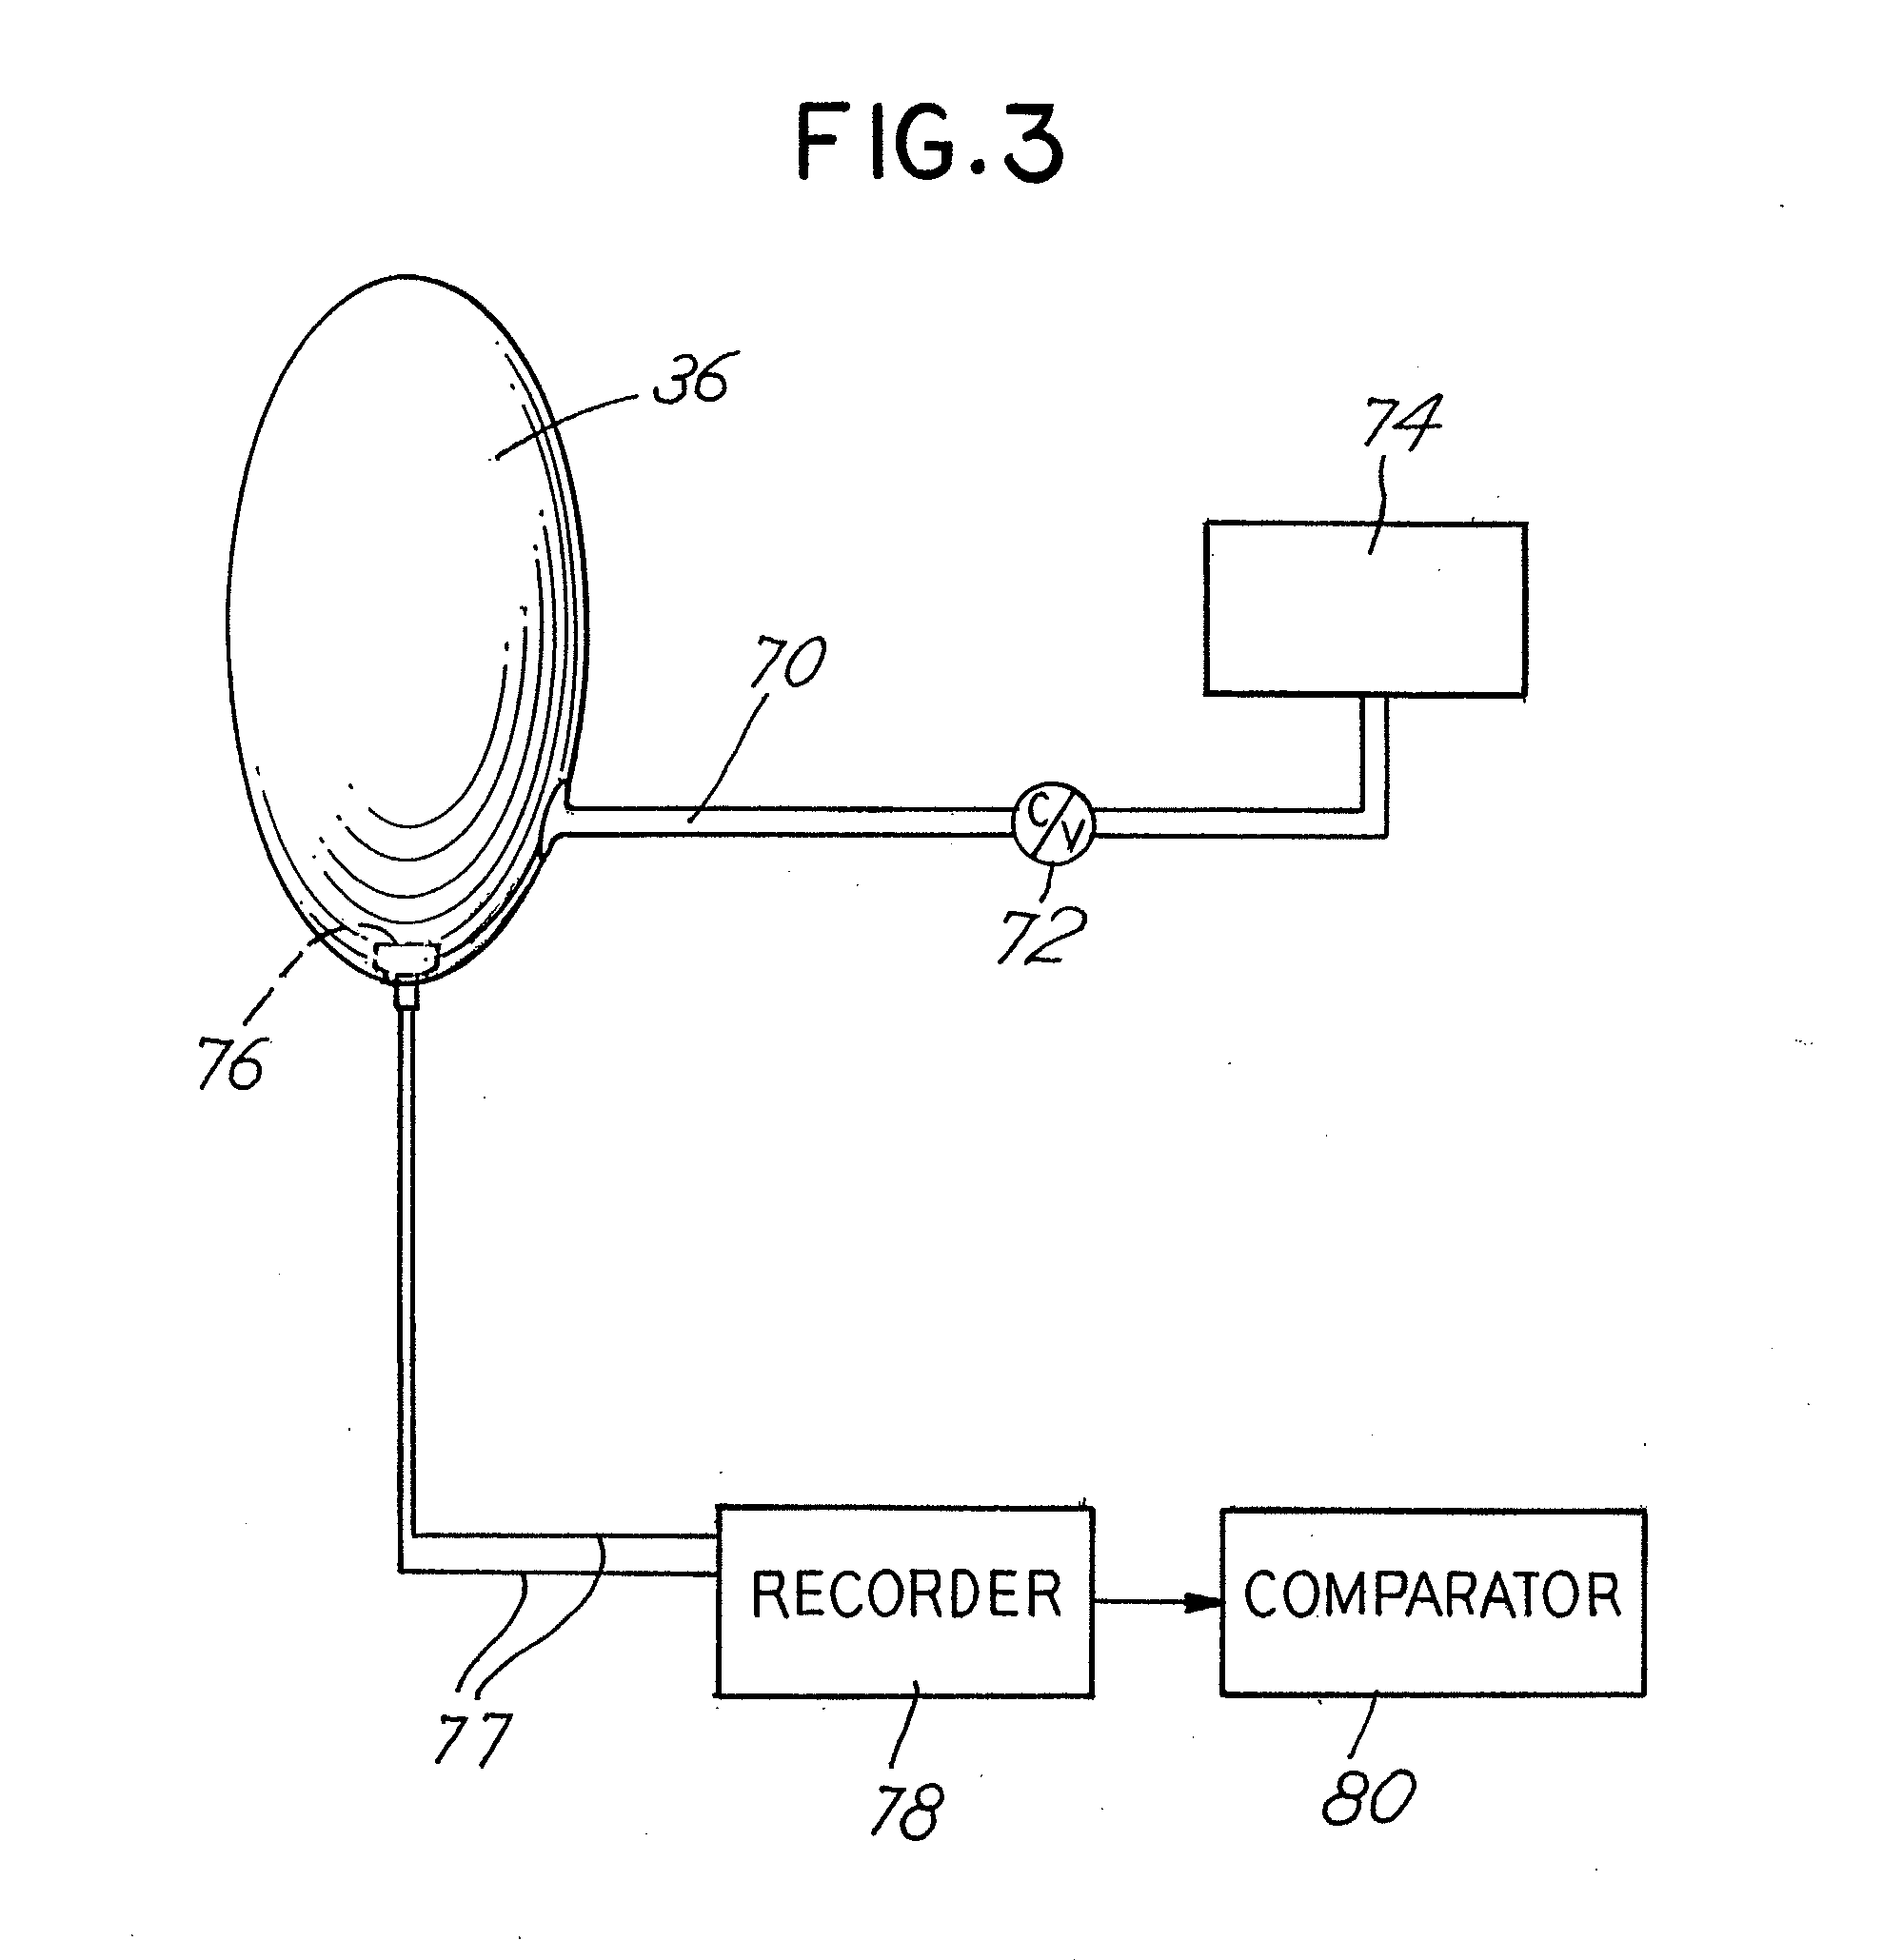 Medical Sensor Kit for Combination with a Chair to Enable Measurement of Diagnostic Information